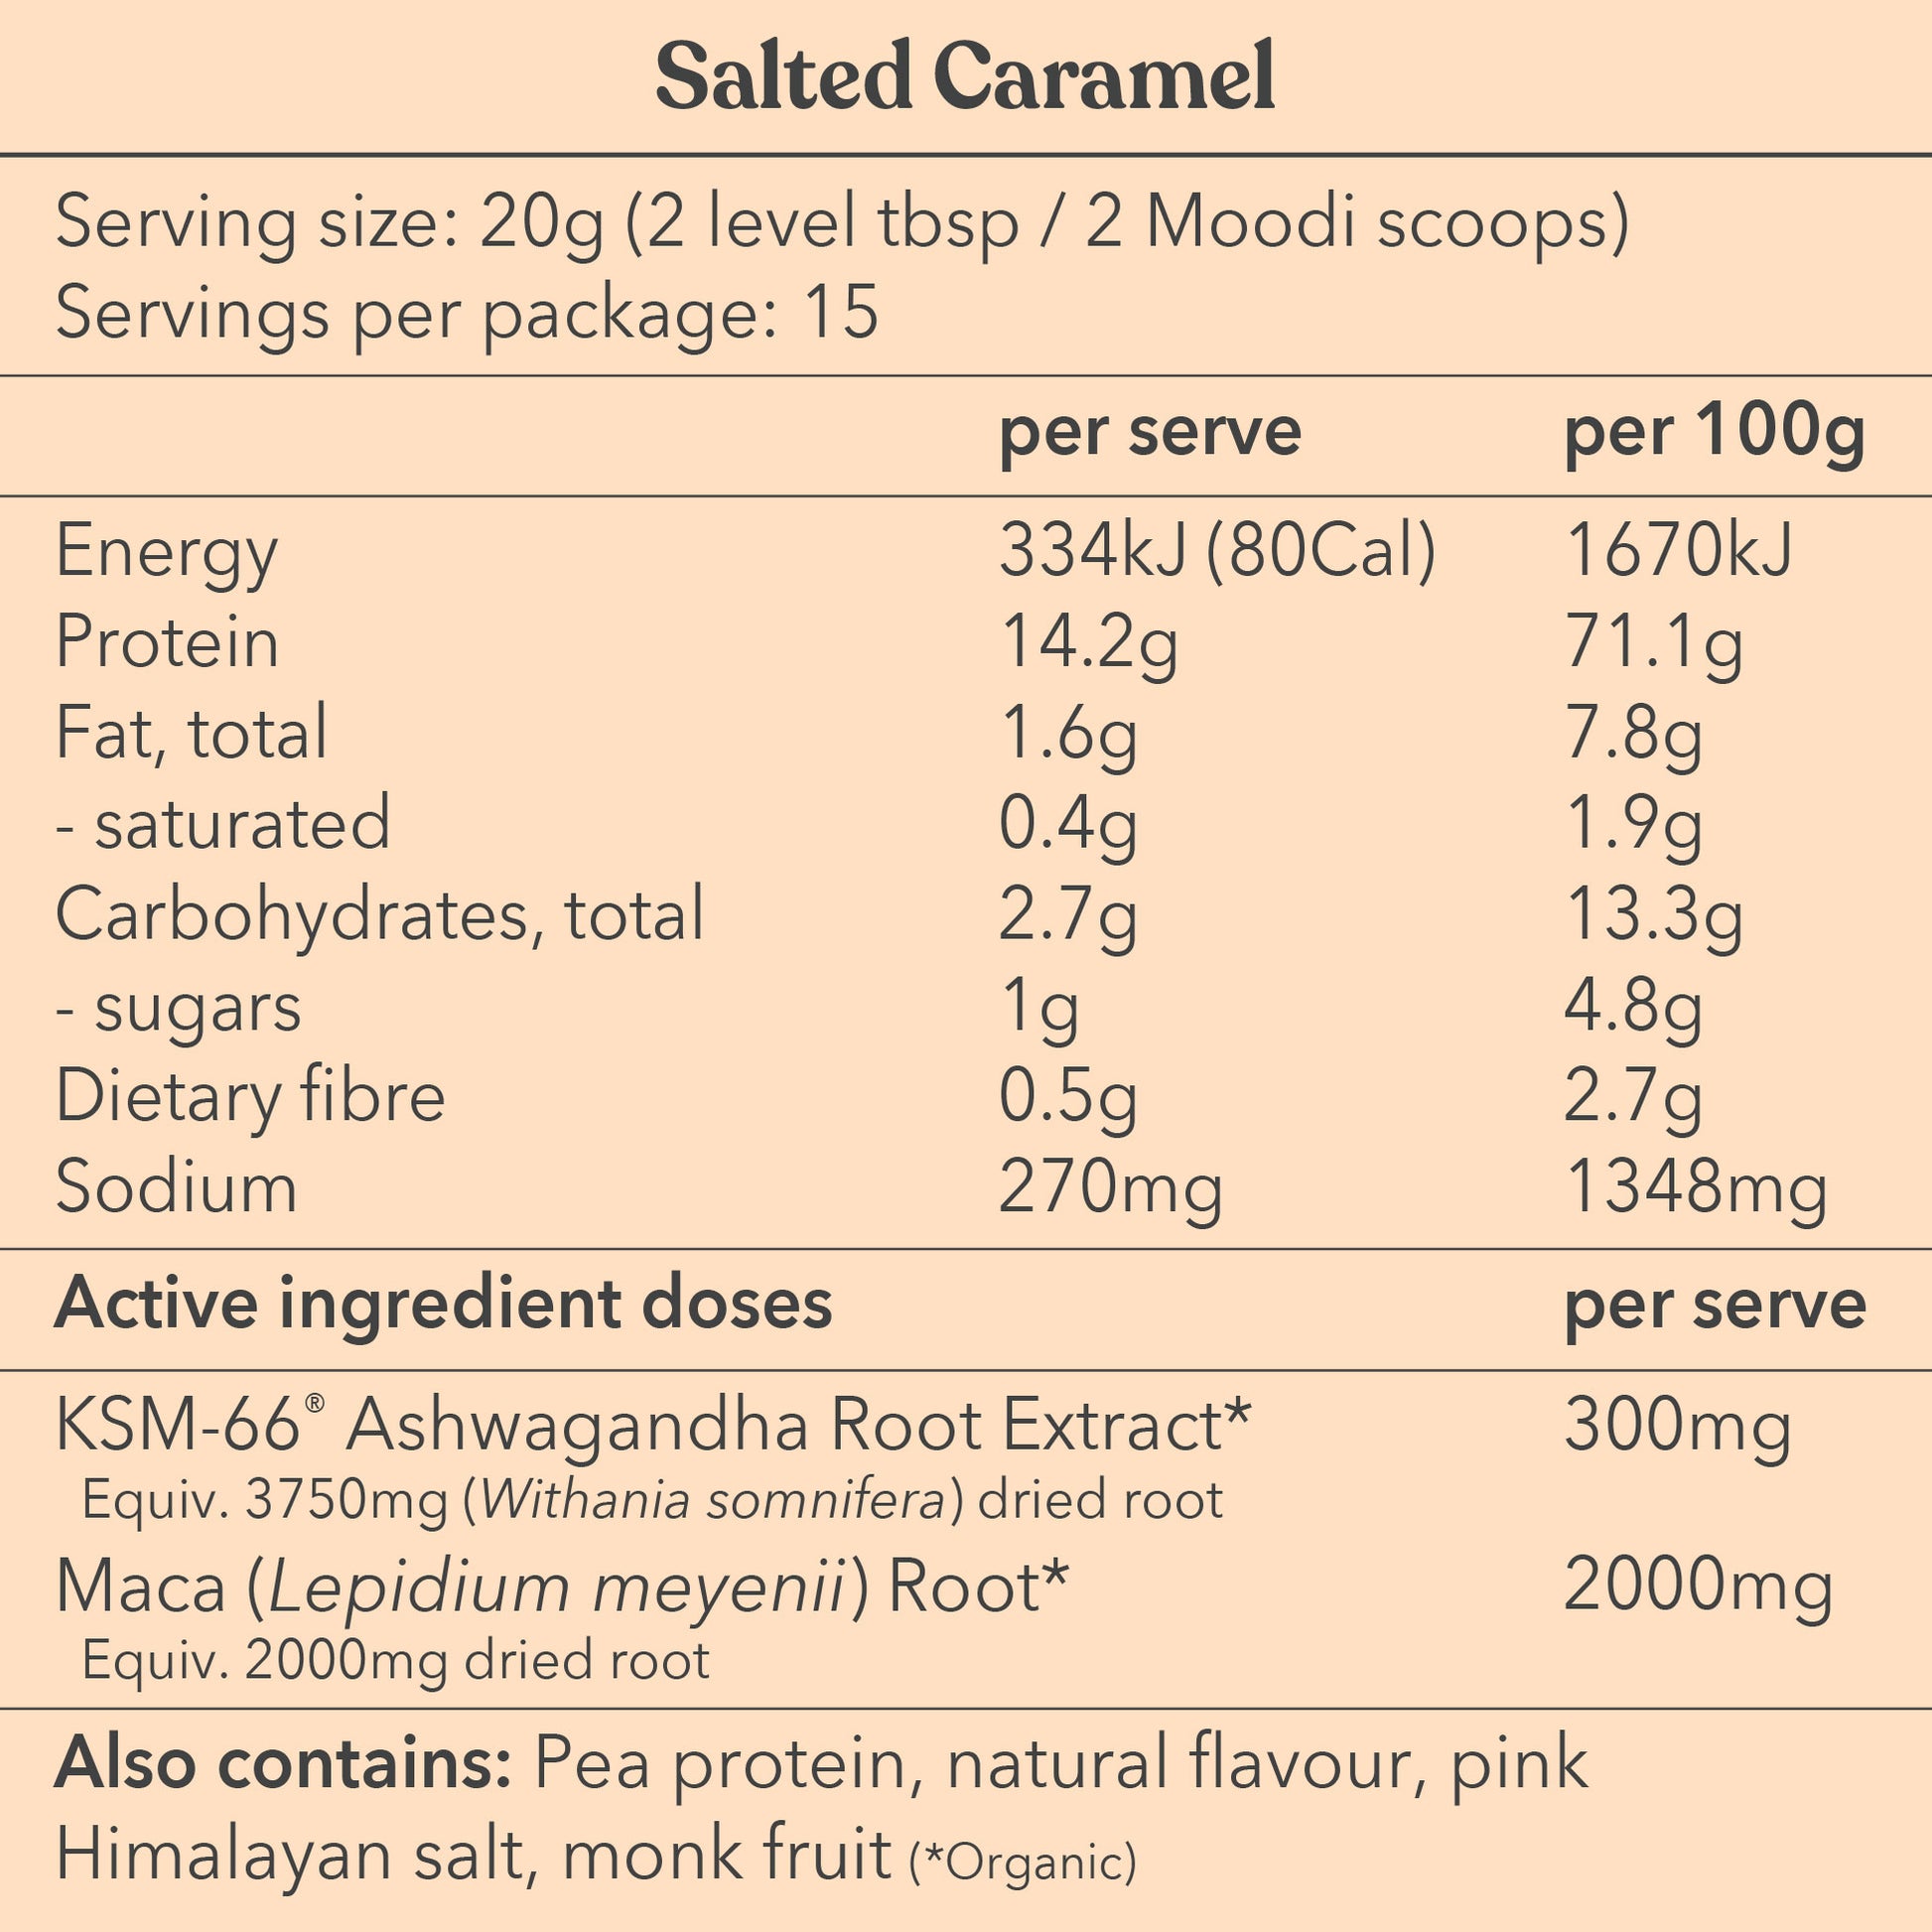 Salted Caramel - Moodi - Functional Protein